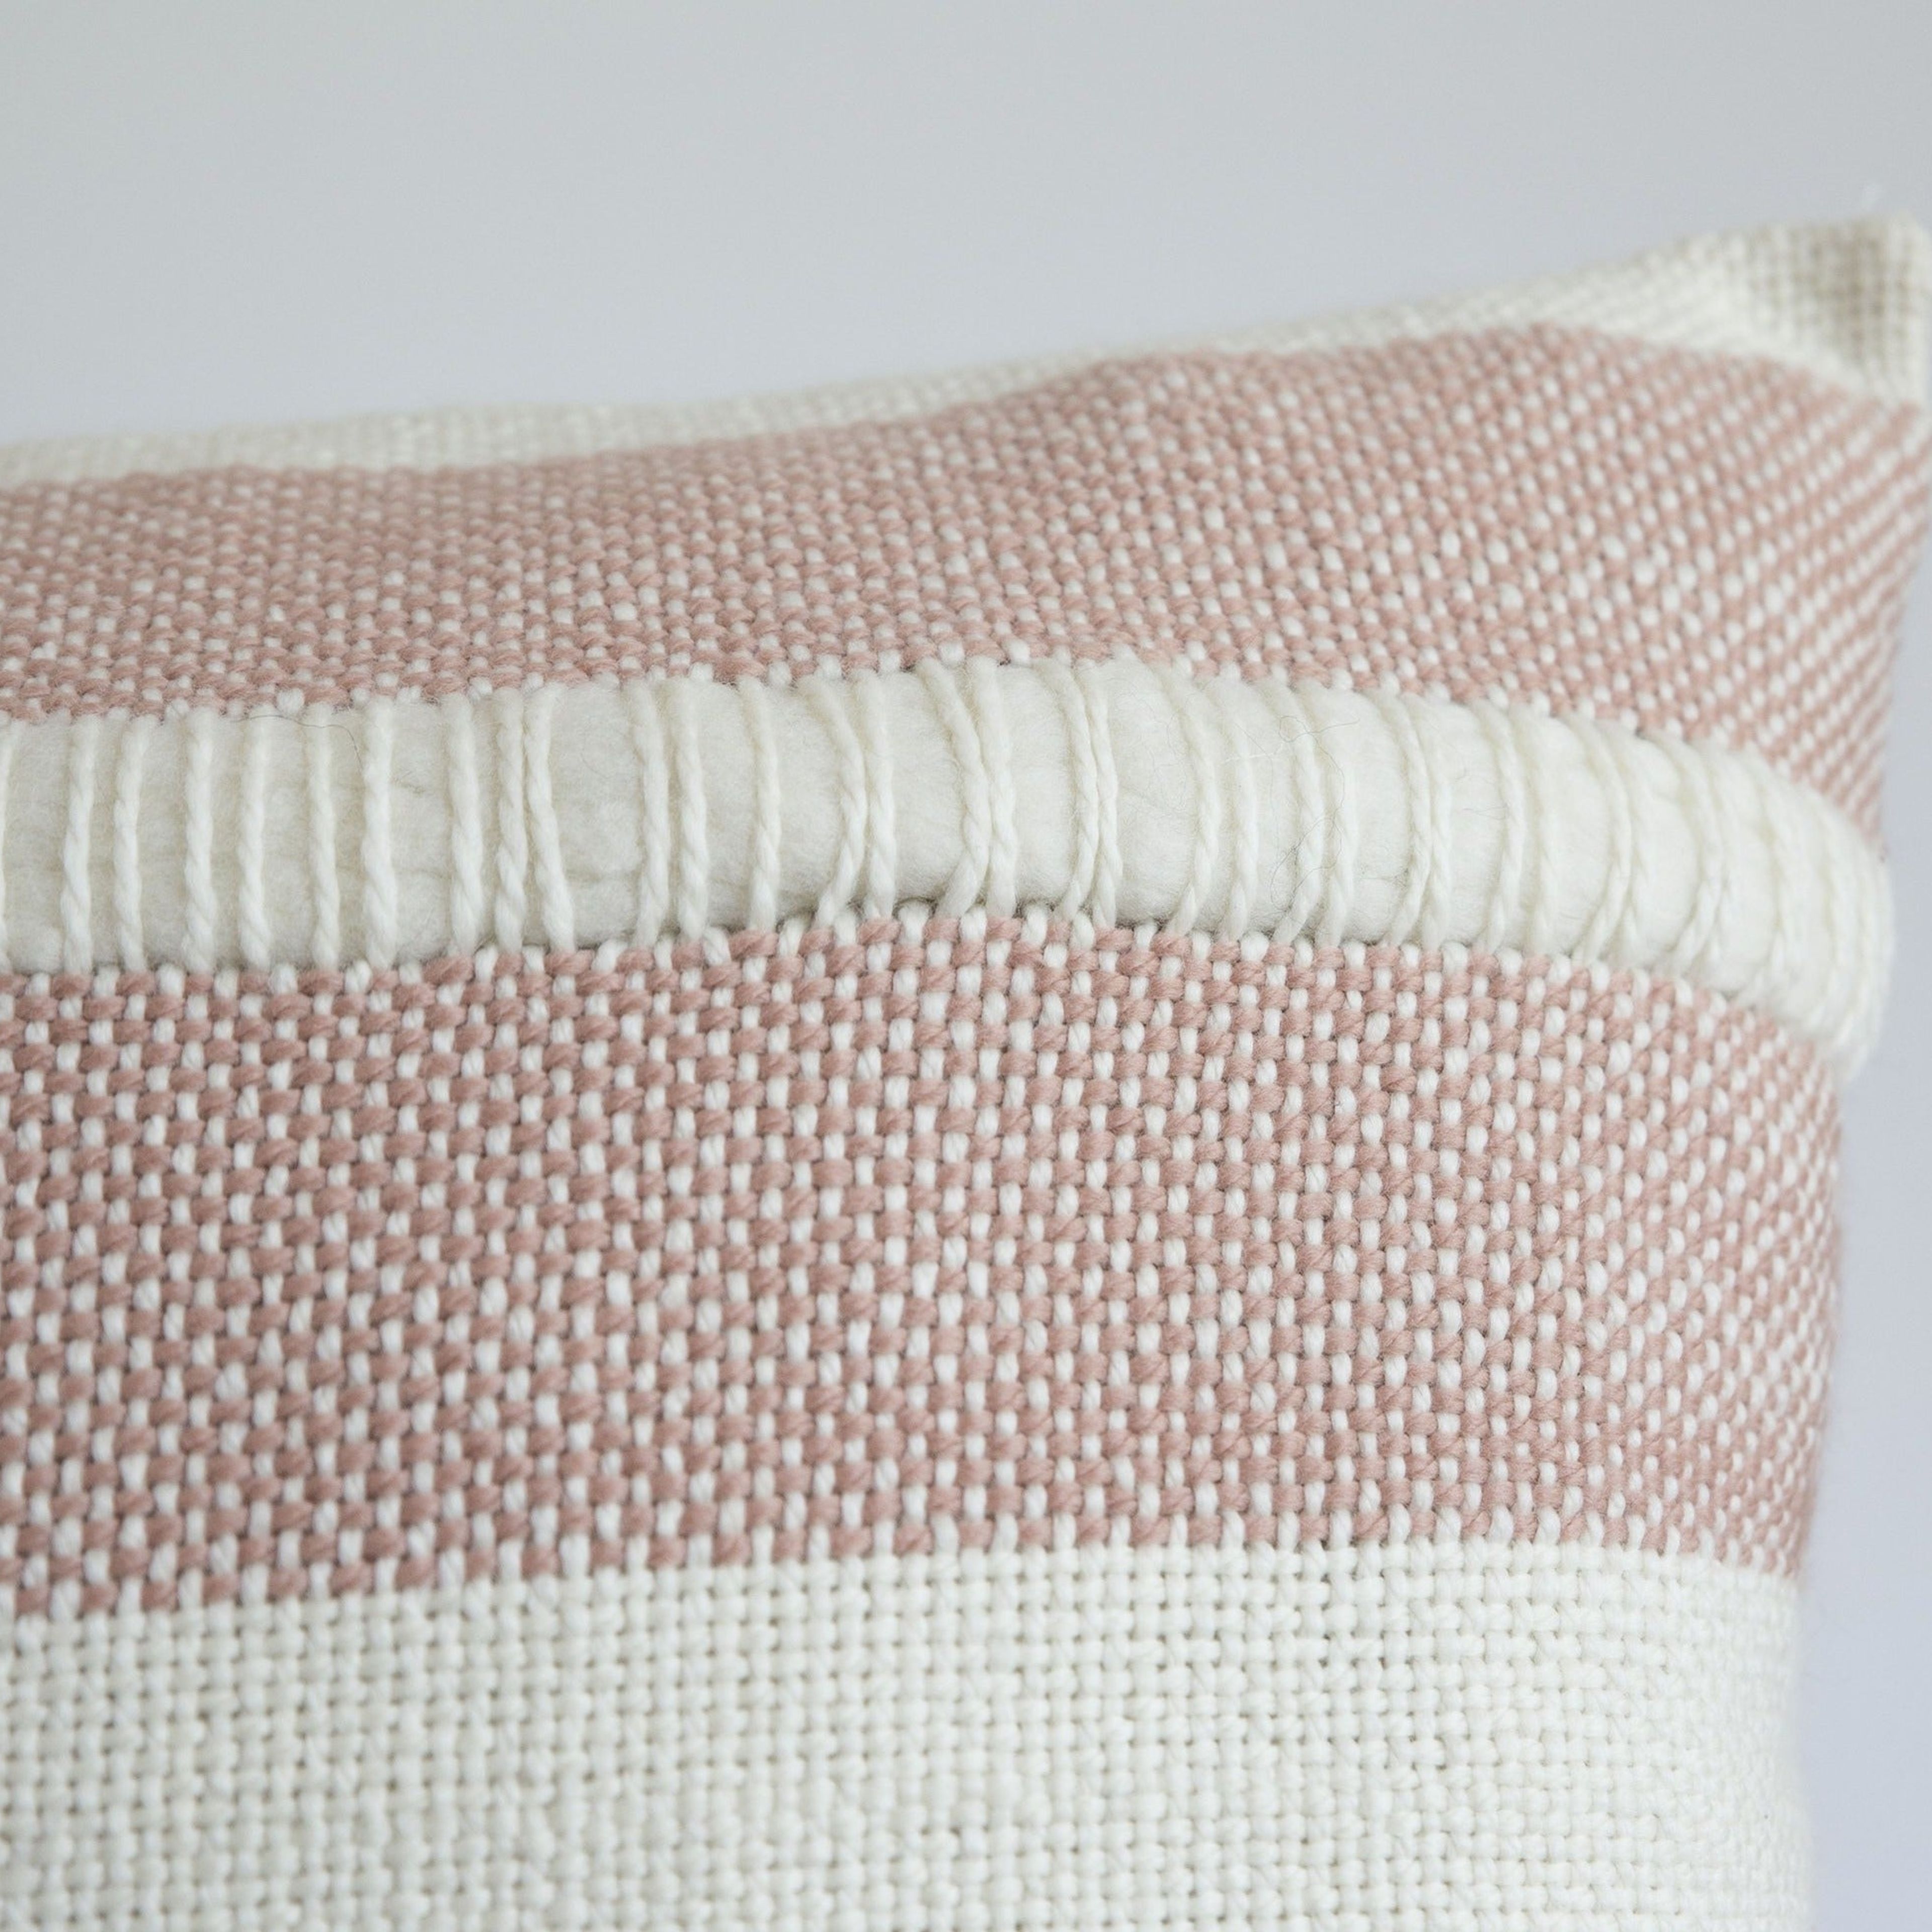 Cushion Cover Striped with Raw Wool in Dusty Rose Mar 19x22